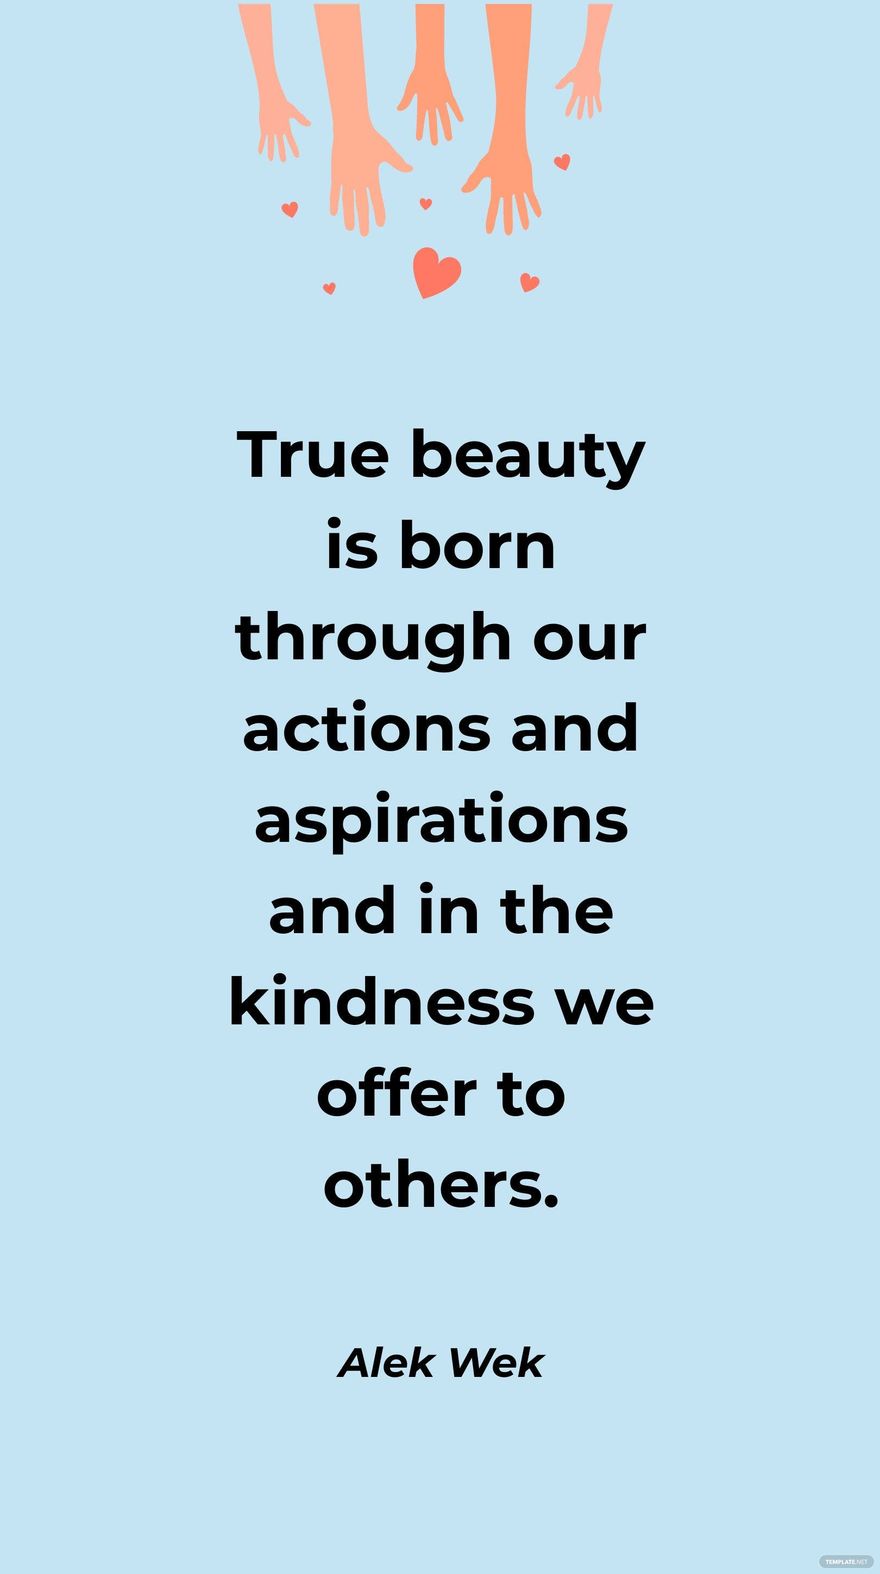 Alek Wek - True beauty is born through our actions and aspirations and in the kindness we offer to others.